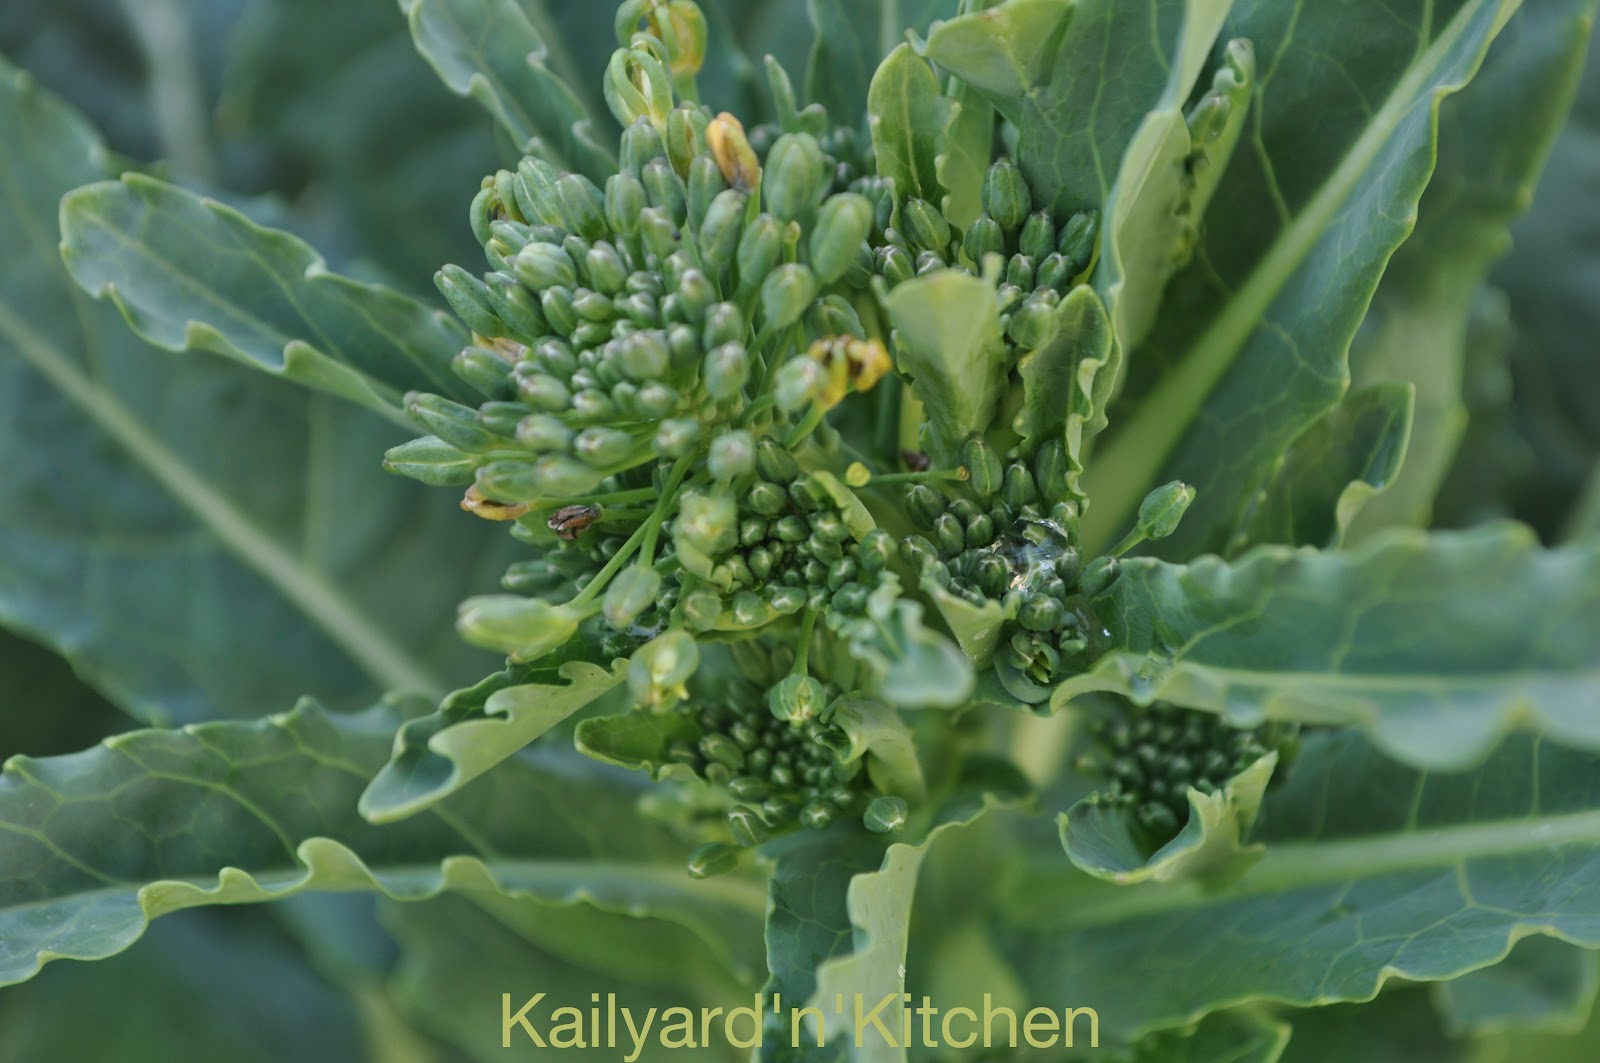 Collards – All You Need to Know